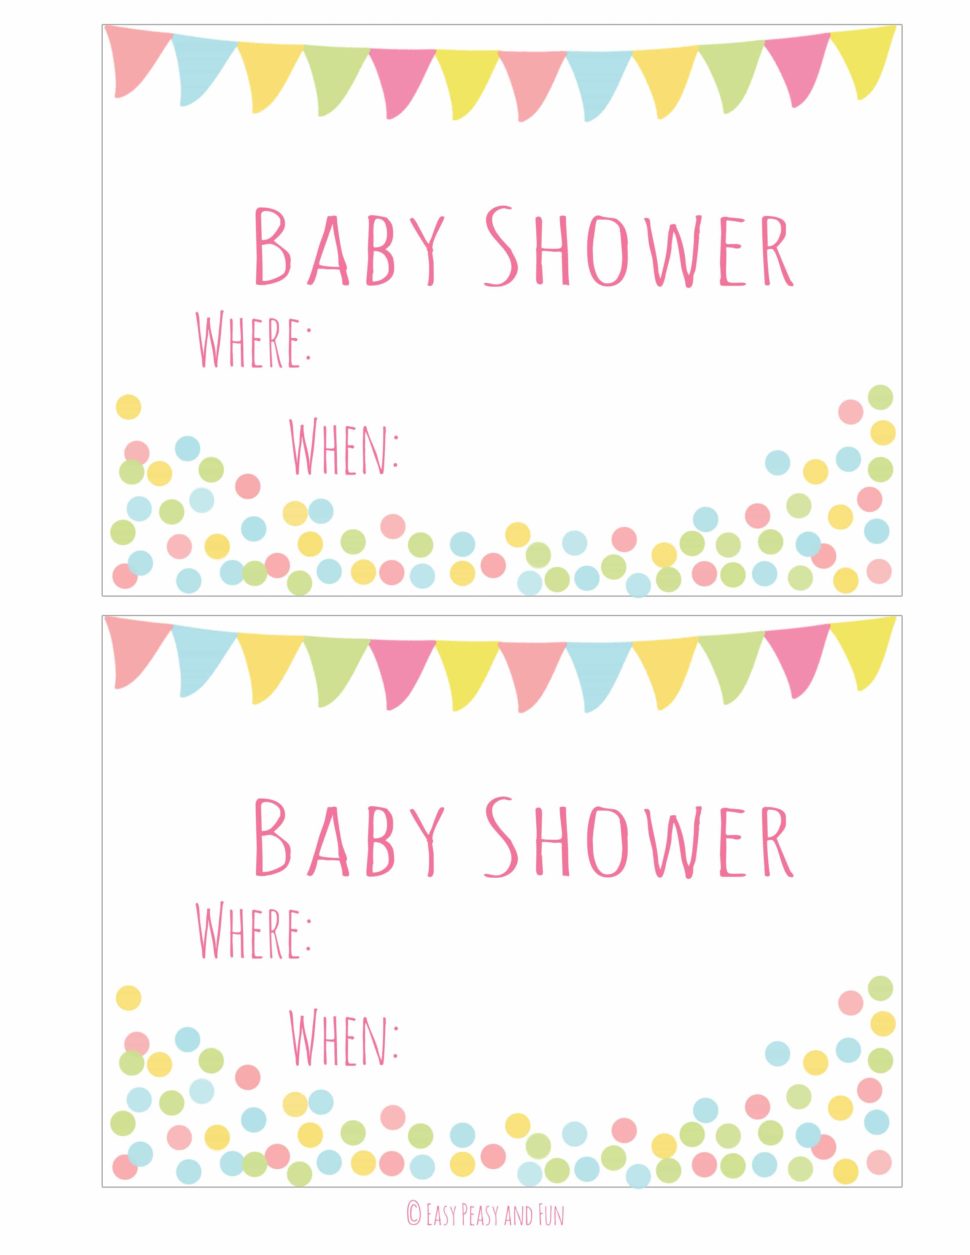 Medium Size of Baby Shower:nursery Themes Elegant Baby Shower Unique Baby Shower Decorations Pinterest Baby Shower Ideas For Girls Cheap Invitations Baby Shower Homemade Baby Shower Decorations Baby Shower Centerpiece Ideas For Boys Homemade Baby Shower Centerpieces